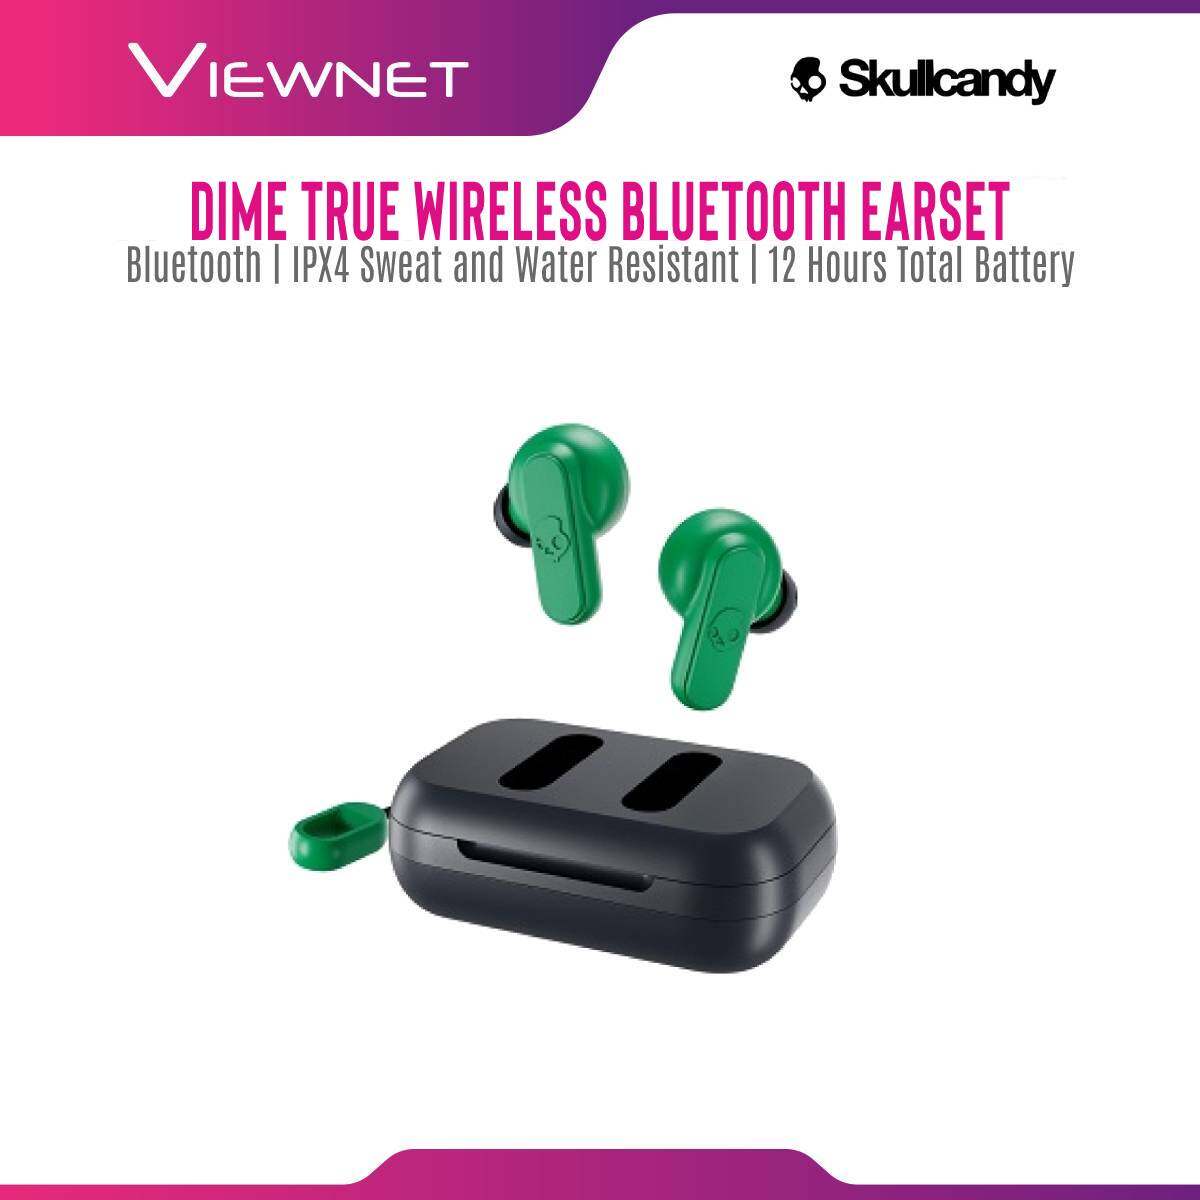 Skullcandy Dime True Wireless Bluetooth Earset with IPX4 Sweat and Water Resistant